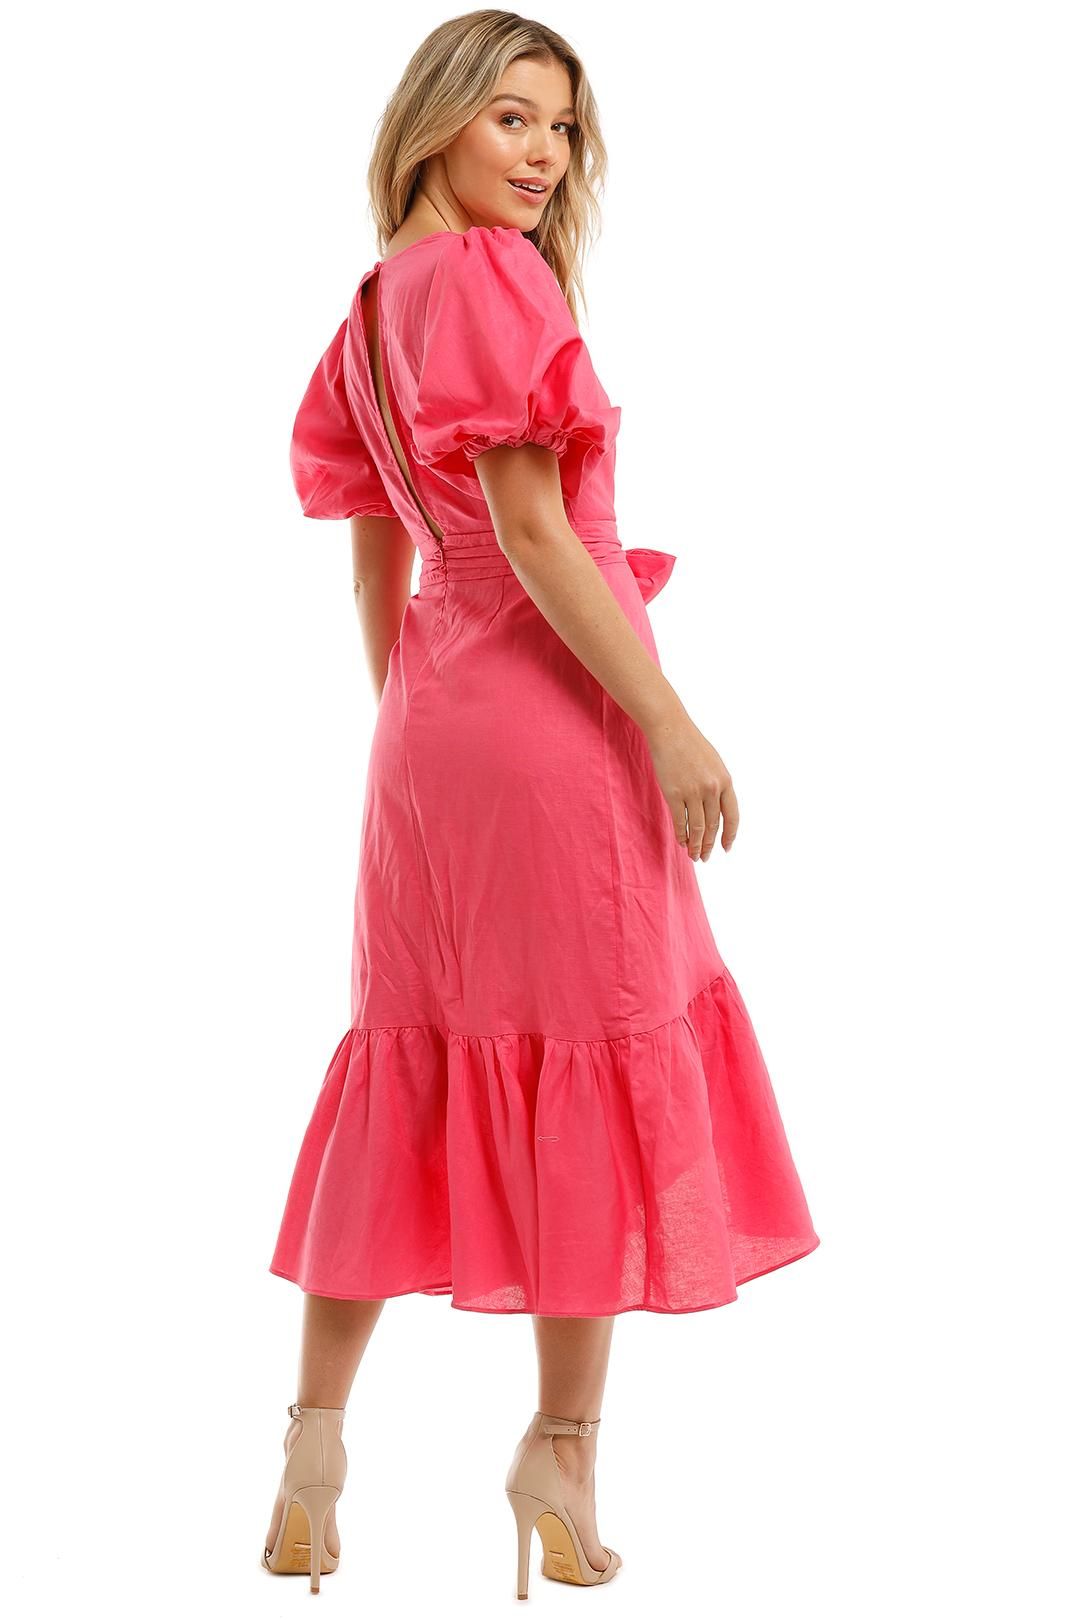 Mink Pink Wrap Frill Midi Dress Neon Pink Puffy Sleeves